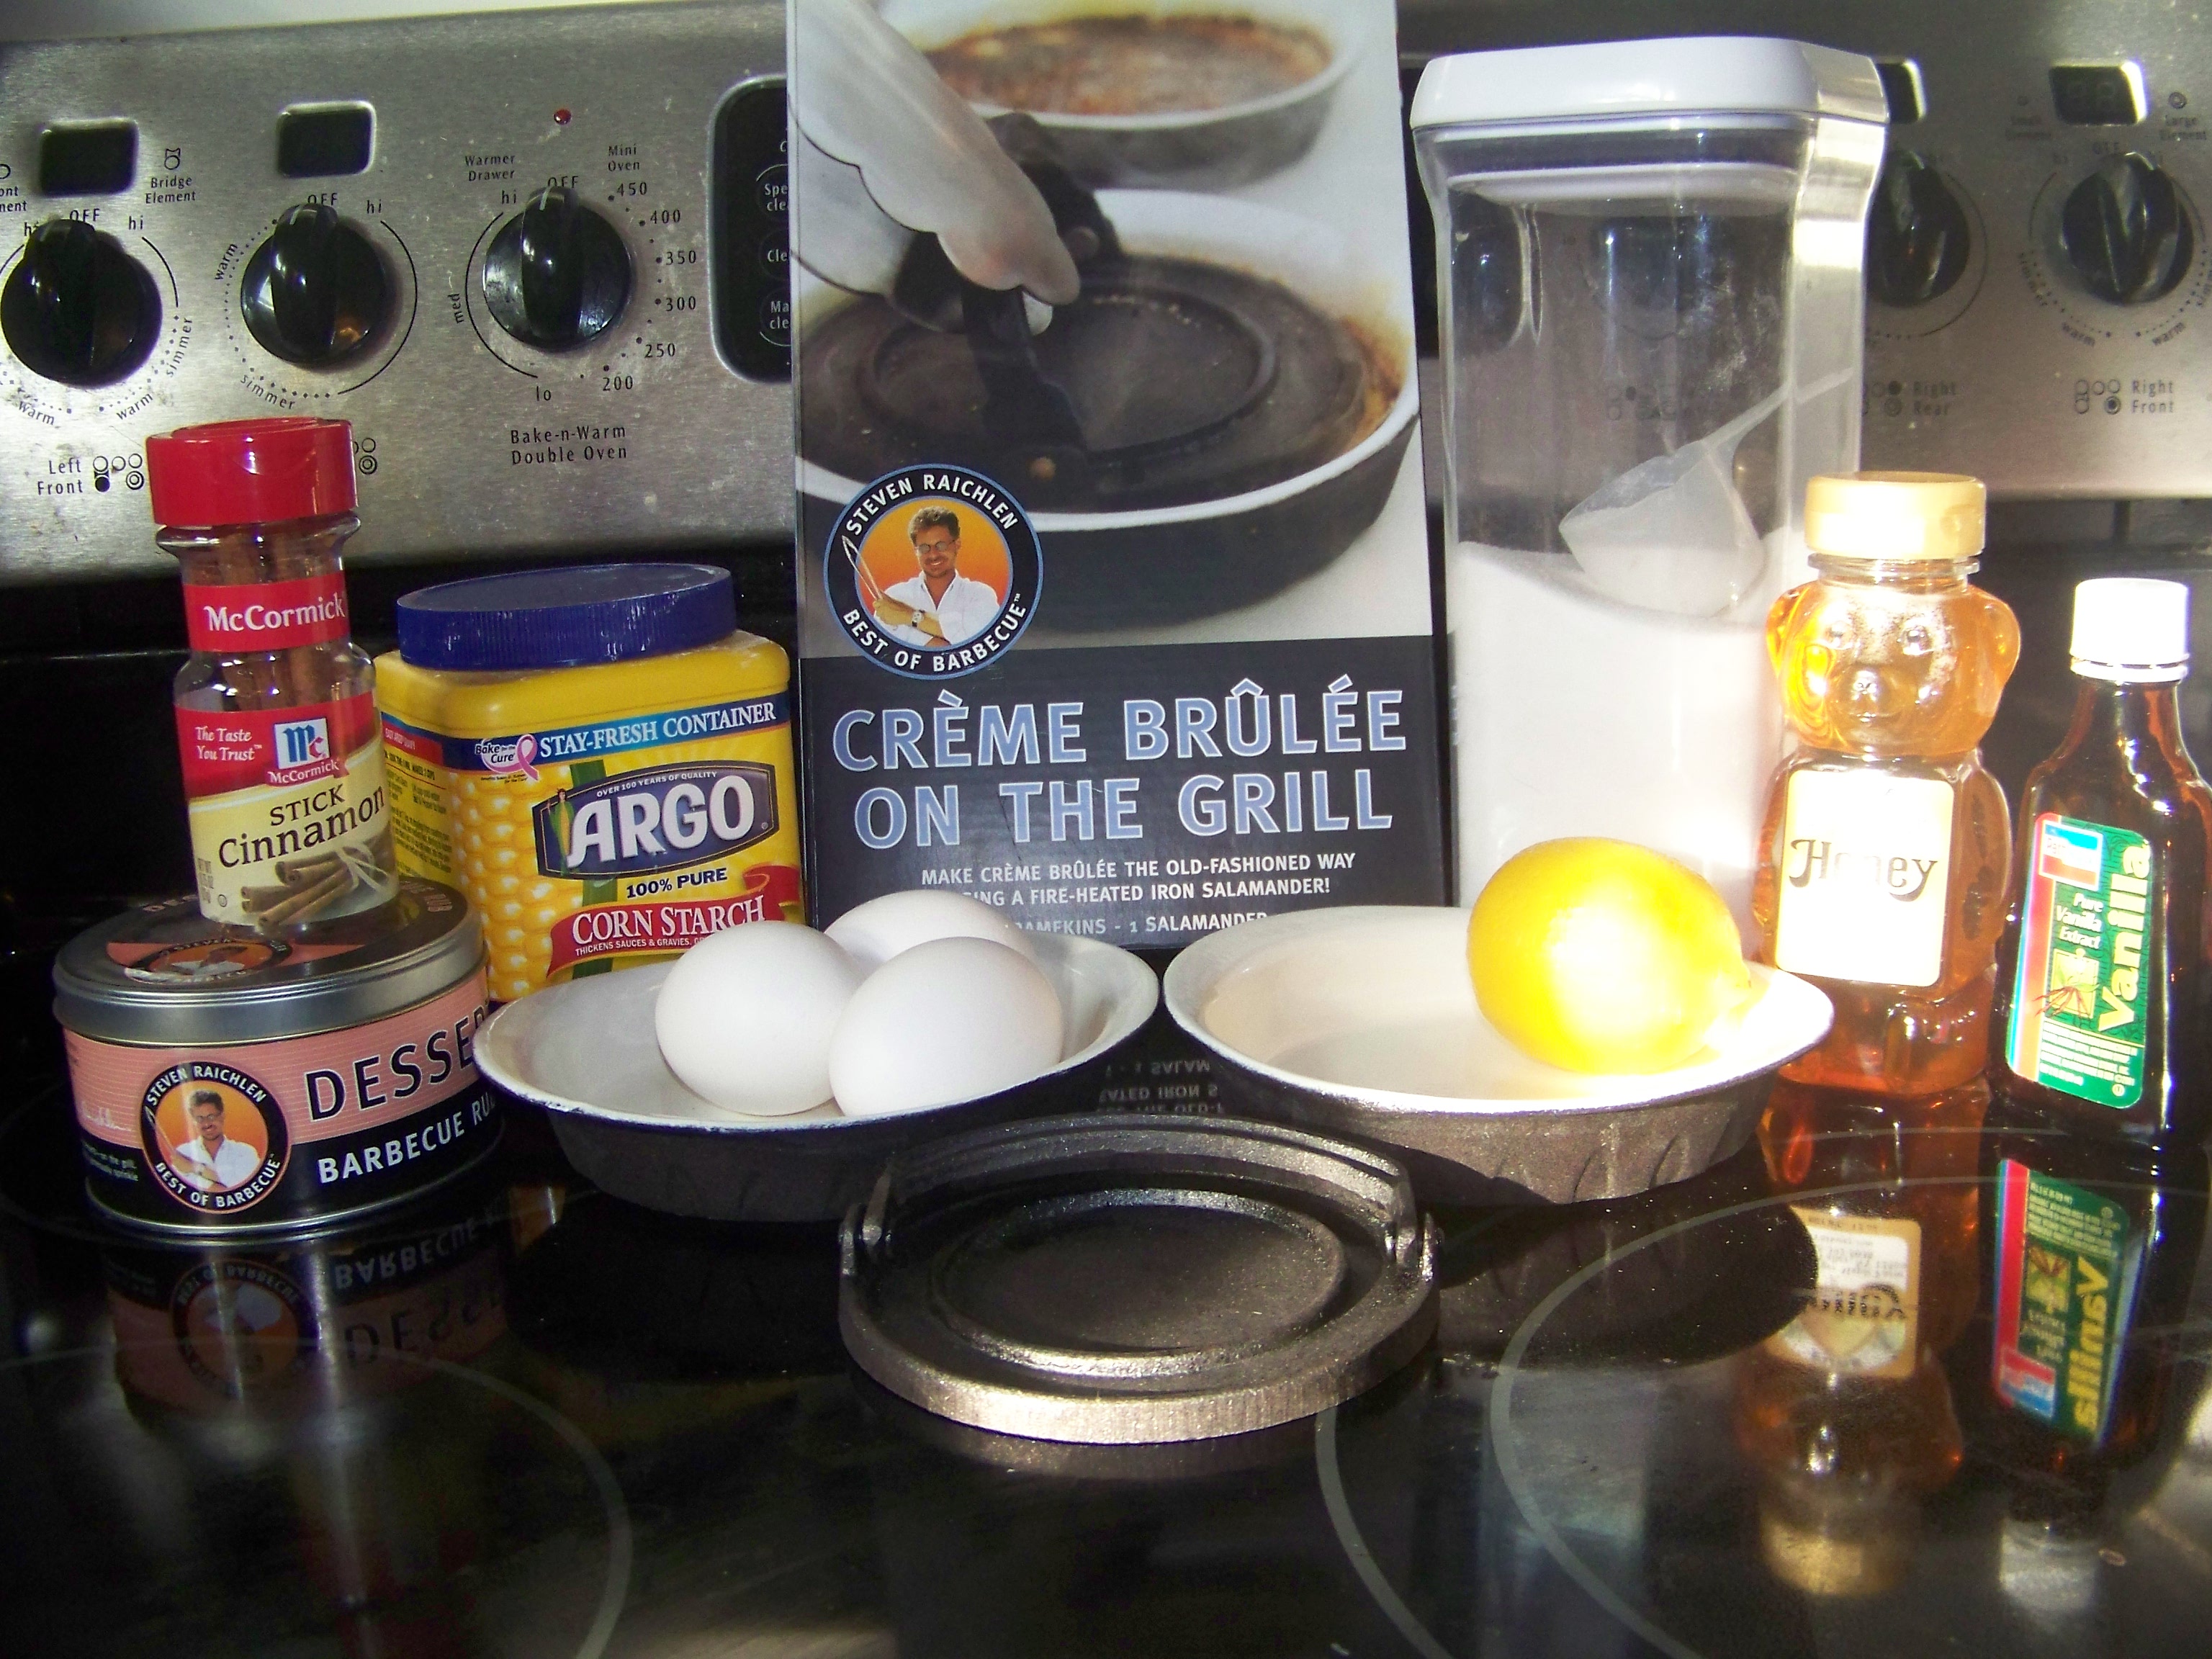 Holiday Gift Guide: Steven Raichlen Creme Brulee Grill Kit